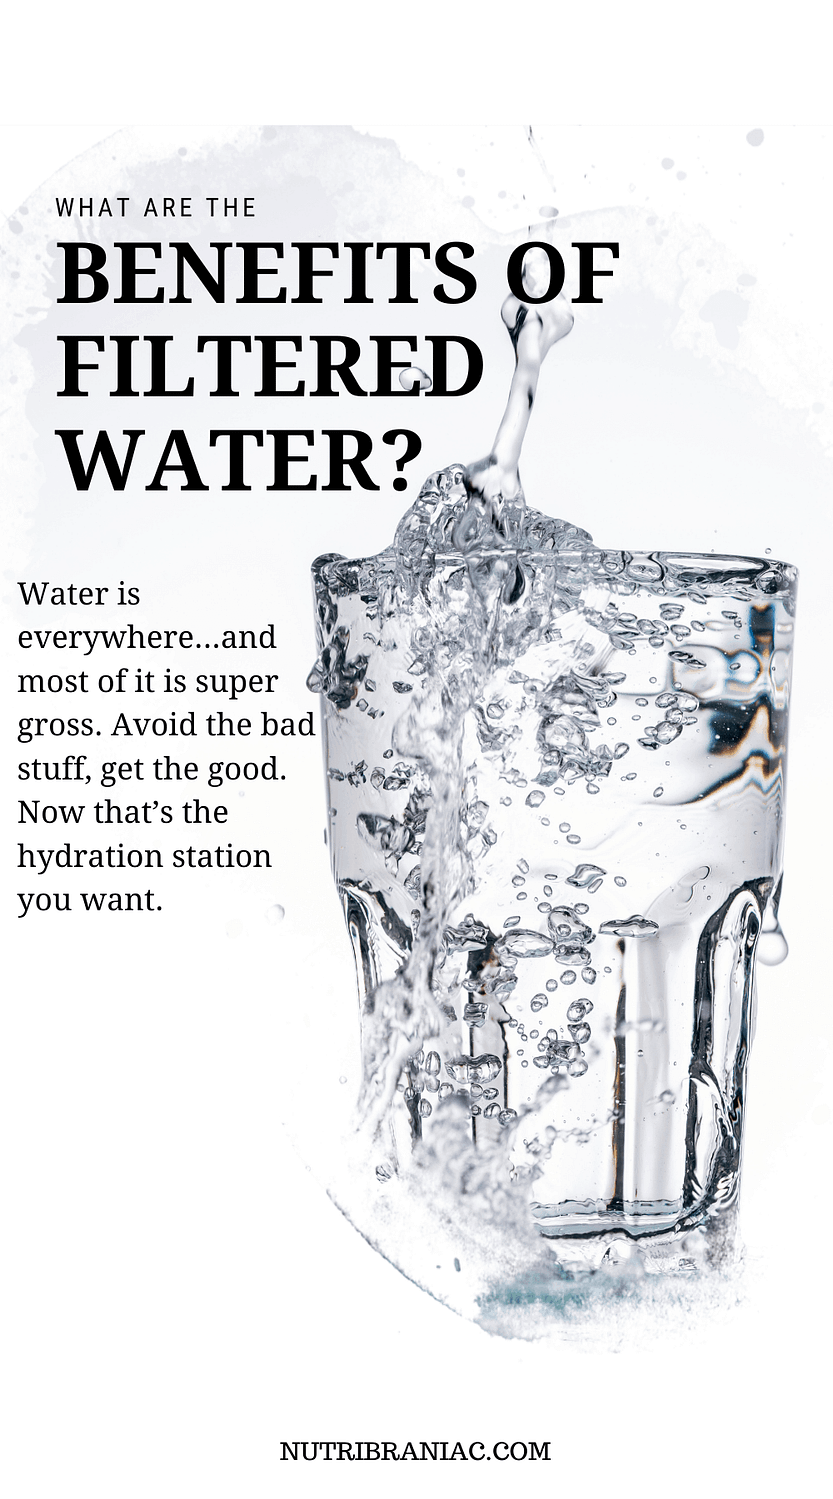 Graphic image of a cup of water with text overlay "What are the Benefits of Filtered Water?"